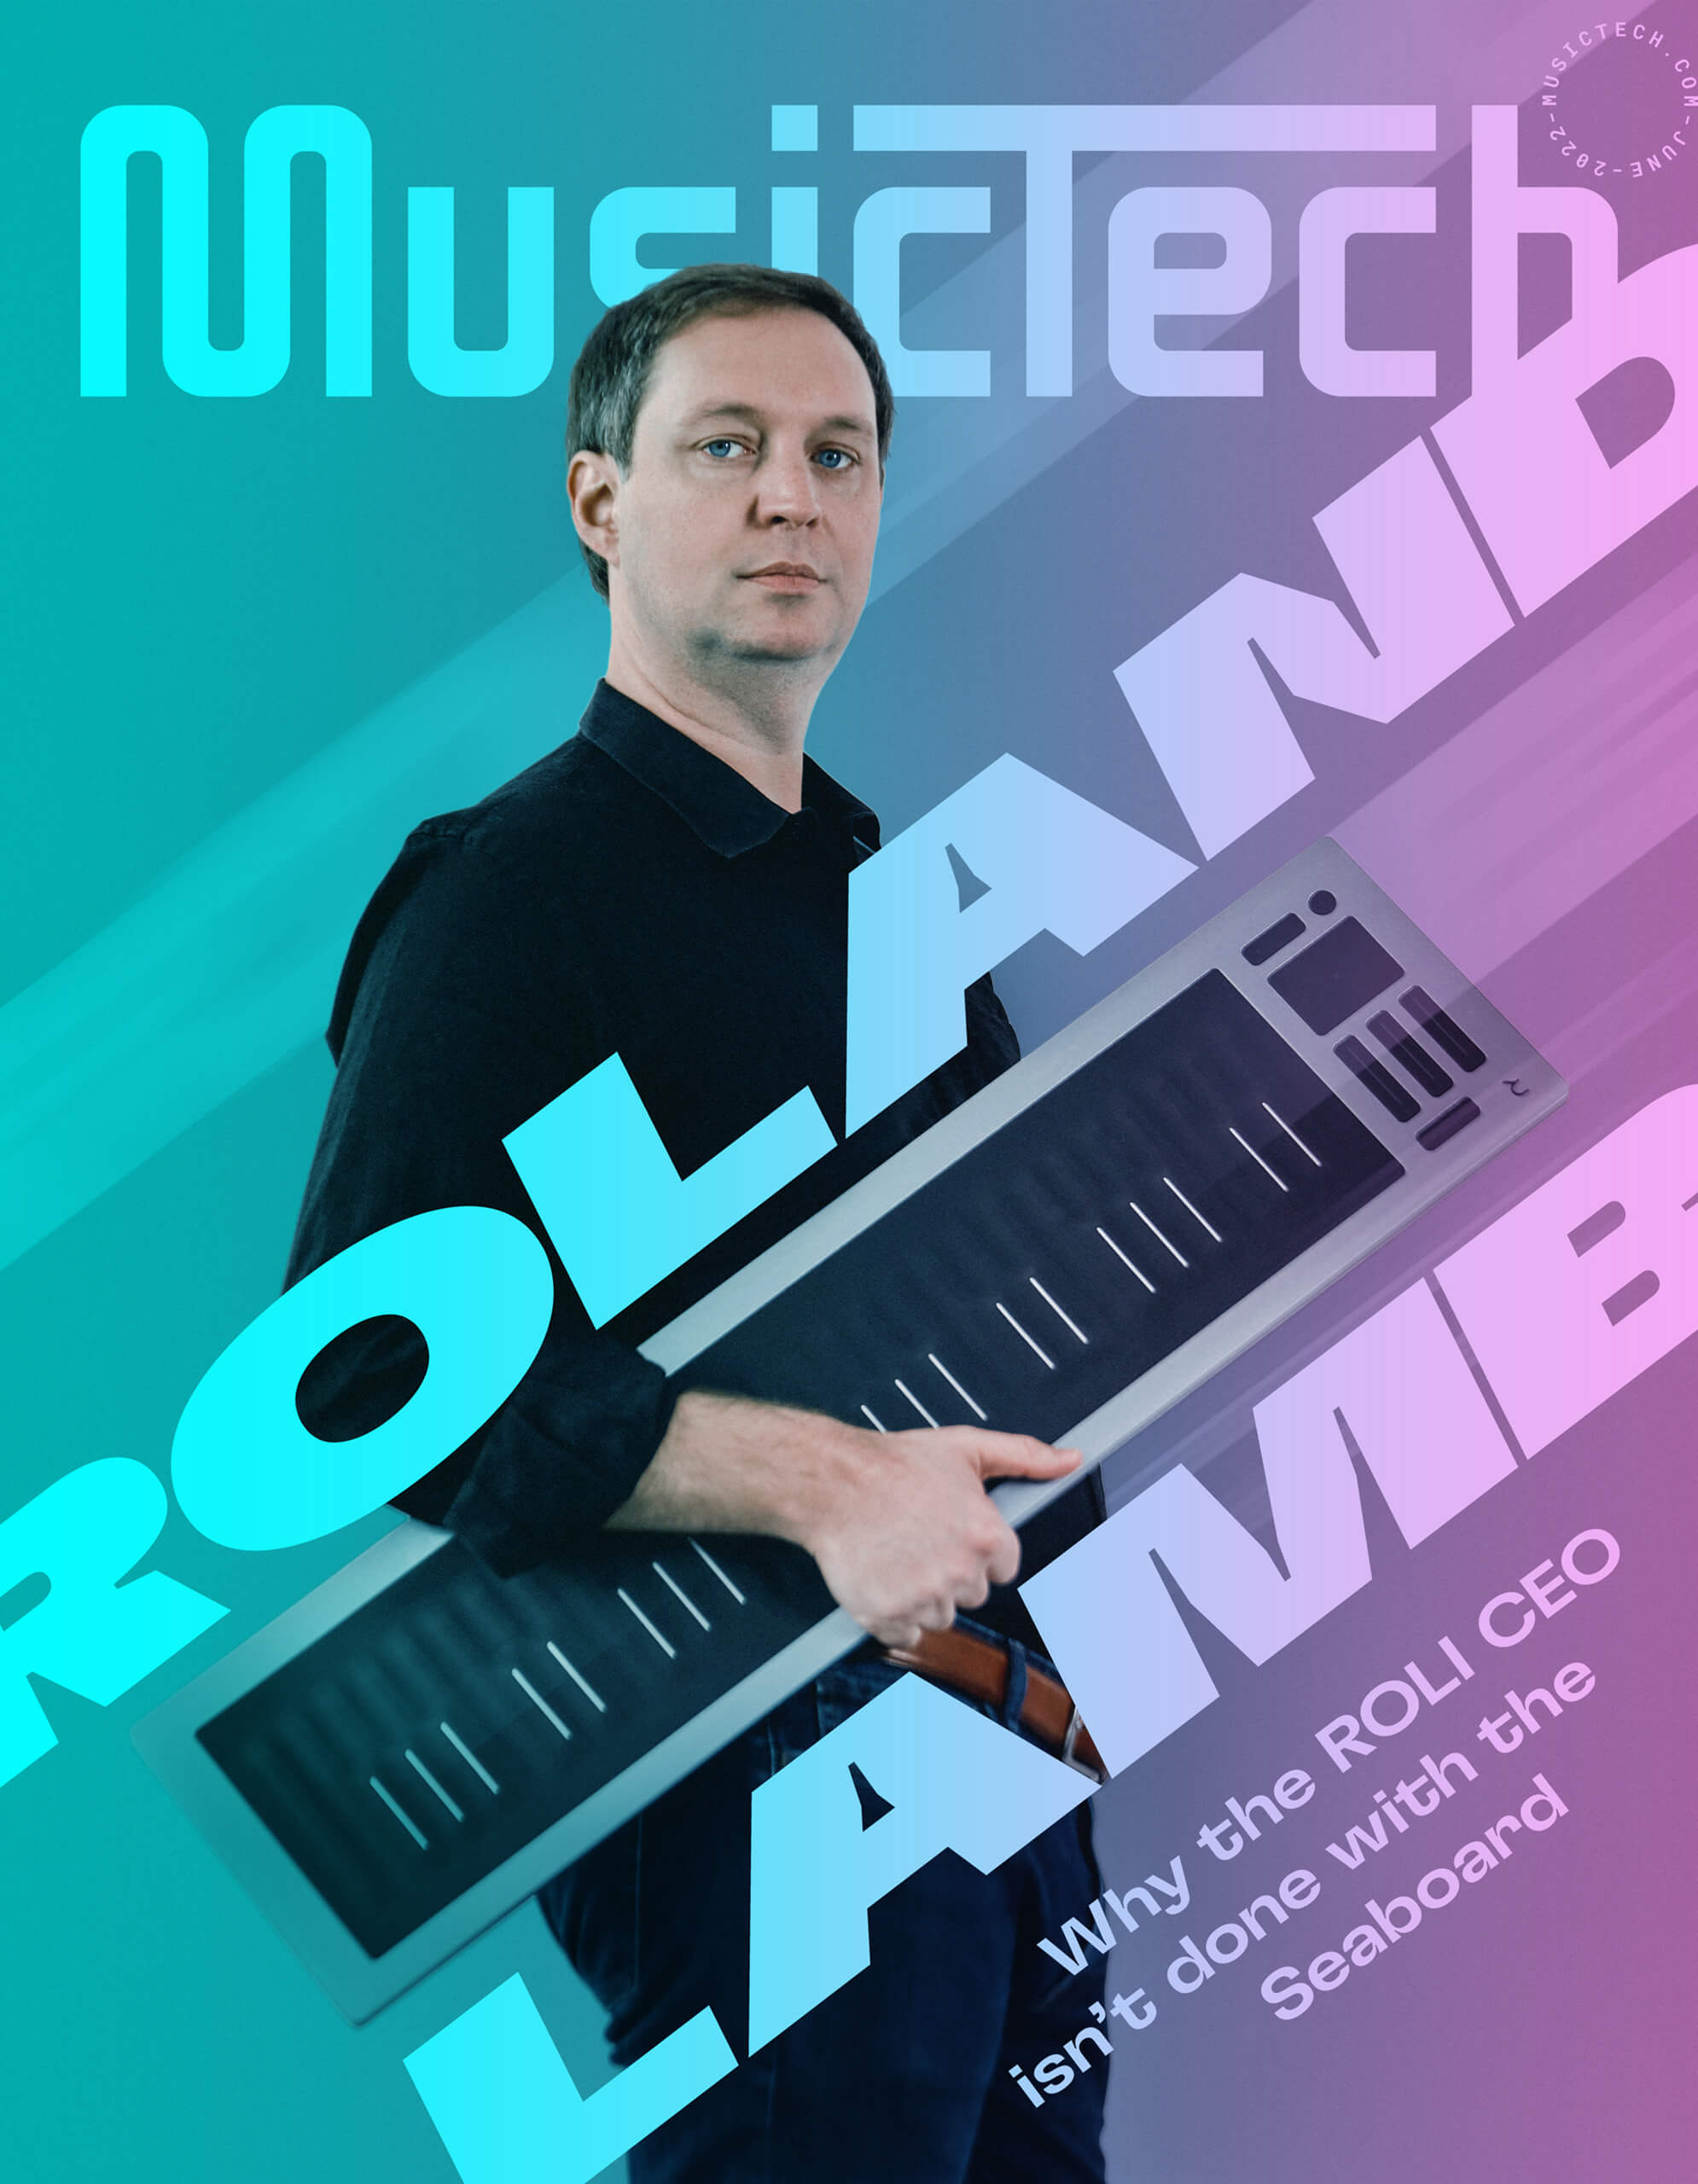 Roland Lamb of ROLI on the cover of MusicTech